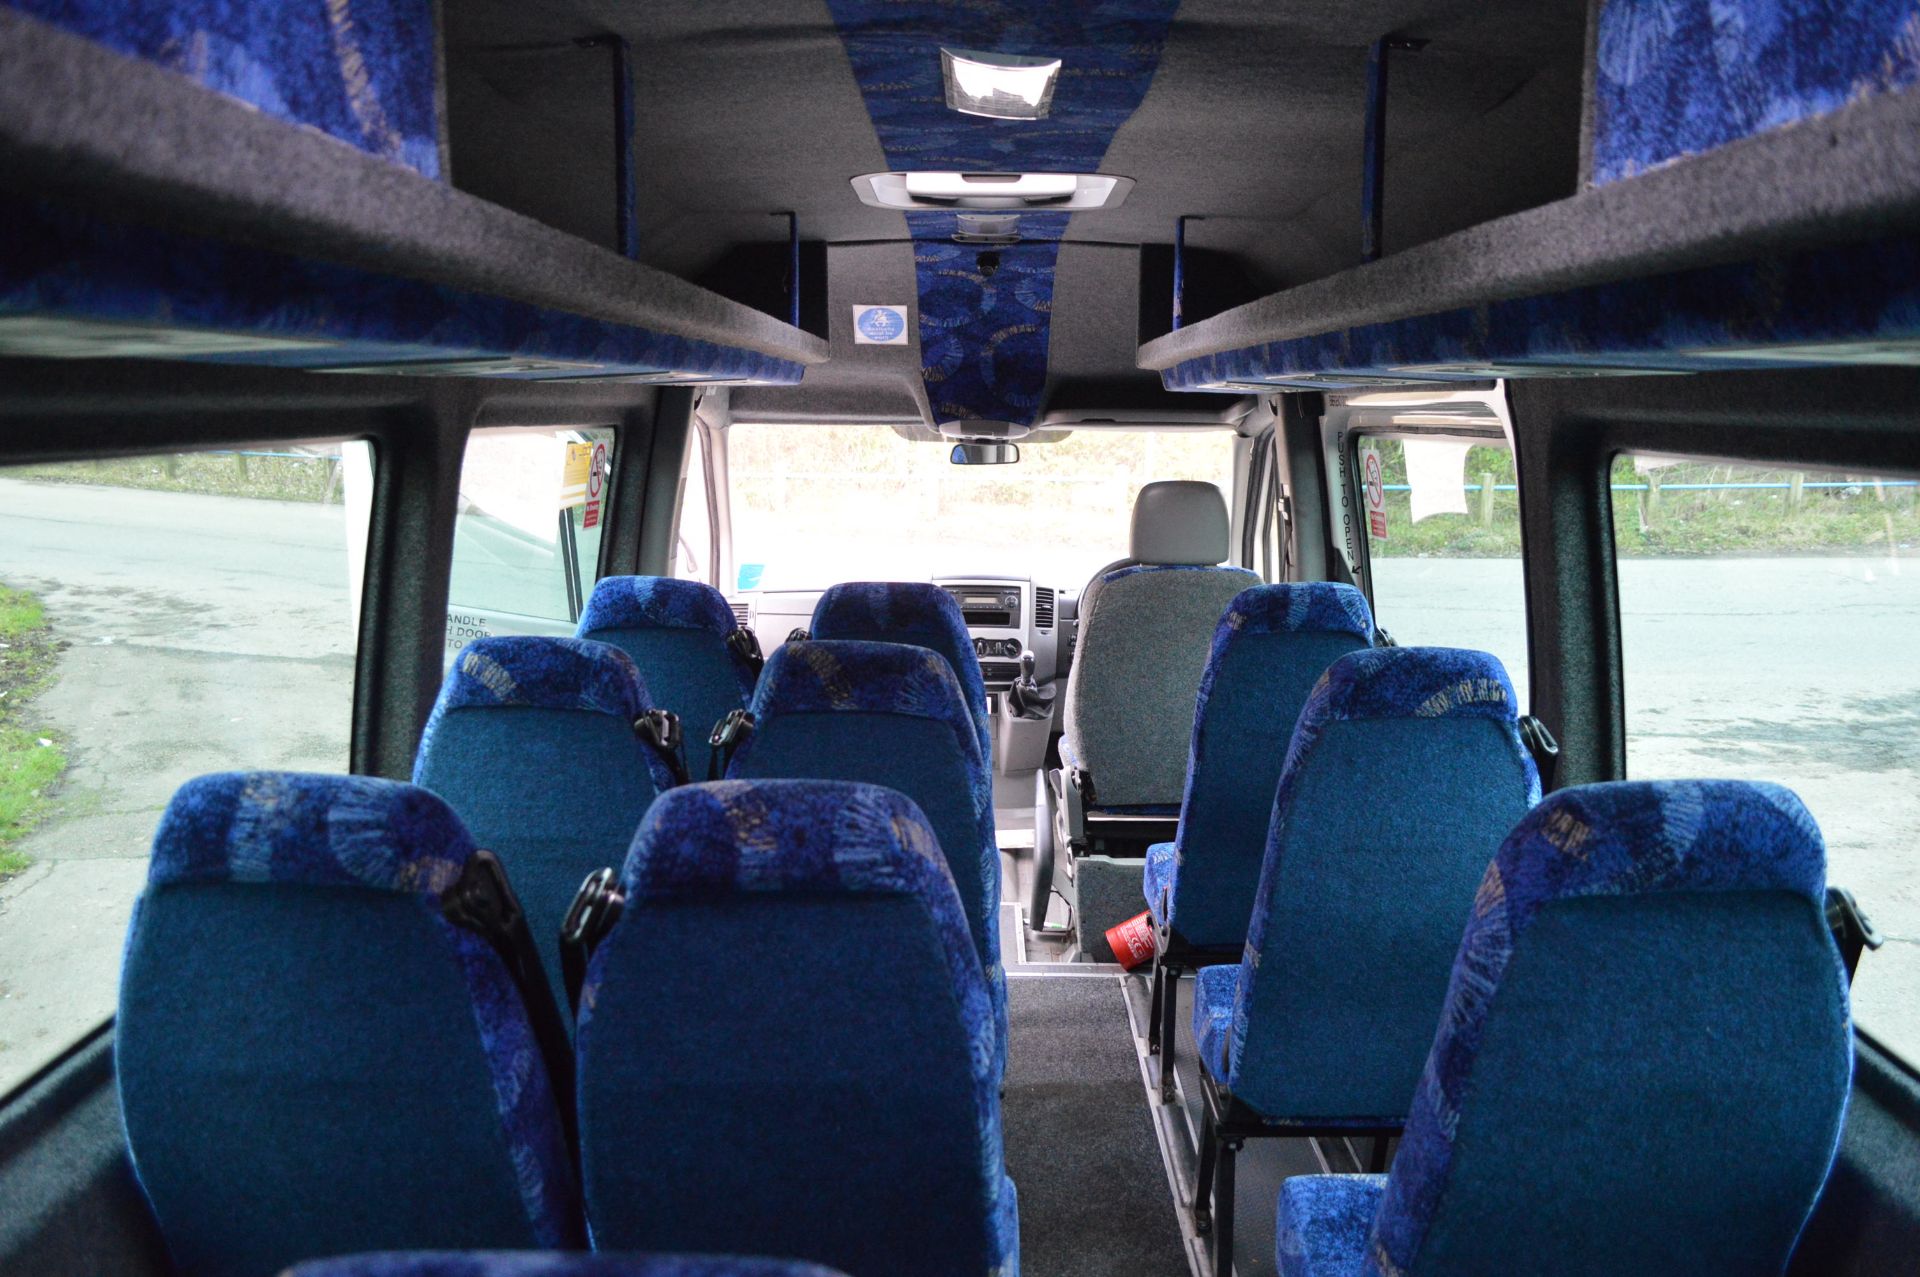 2009/09 REG VOLKSWAGEN CRAFTER 17 SEATER 5 TON MINIBUS / COACH 2.5 DIESEL, SHOWING 2 FORMER KEEPERS - Image 12 of 25